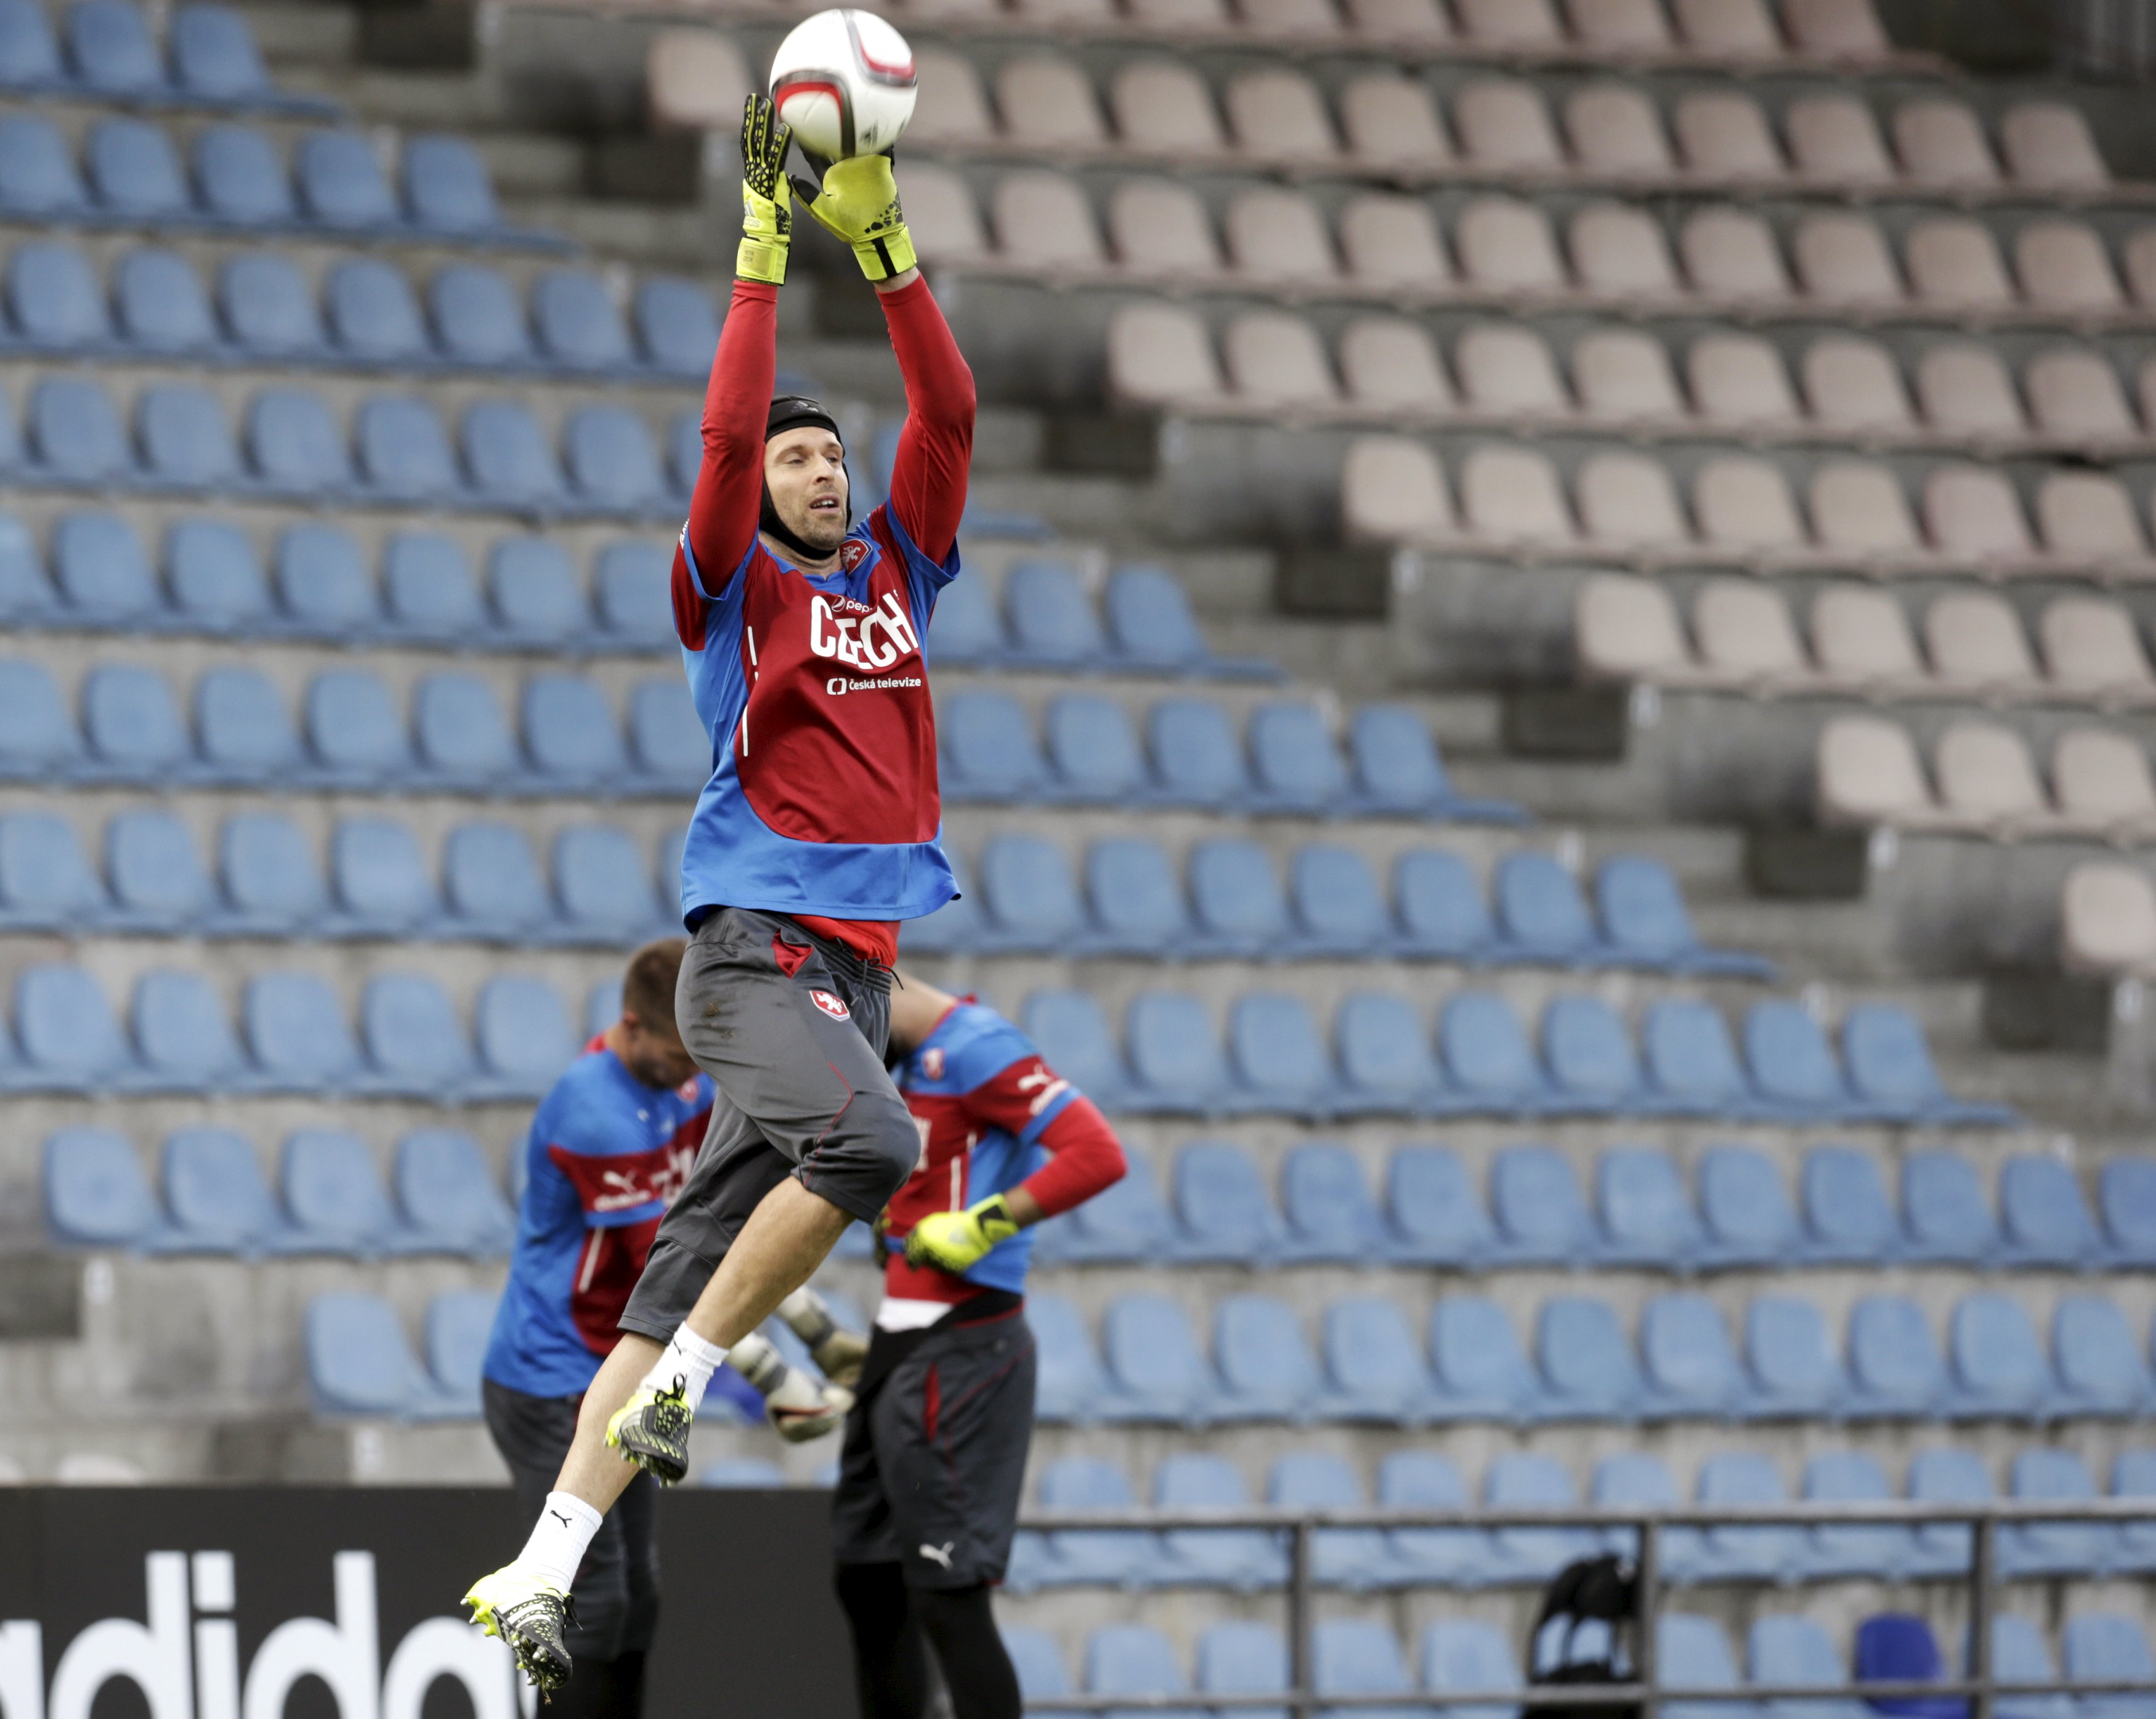 Czech Republic's goalkeeper Peter Cech attends a training session ahead of their Euro 2016 qualification match against Latvia in Riga, Latvia, September 5, 2015. REUTERS/Ints Kalnins